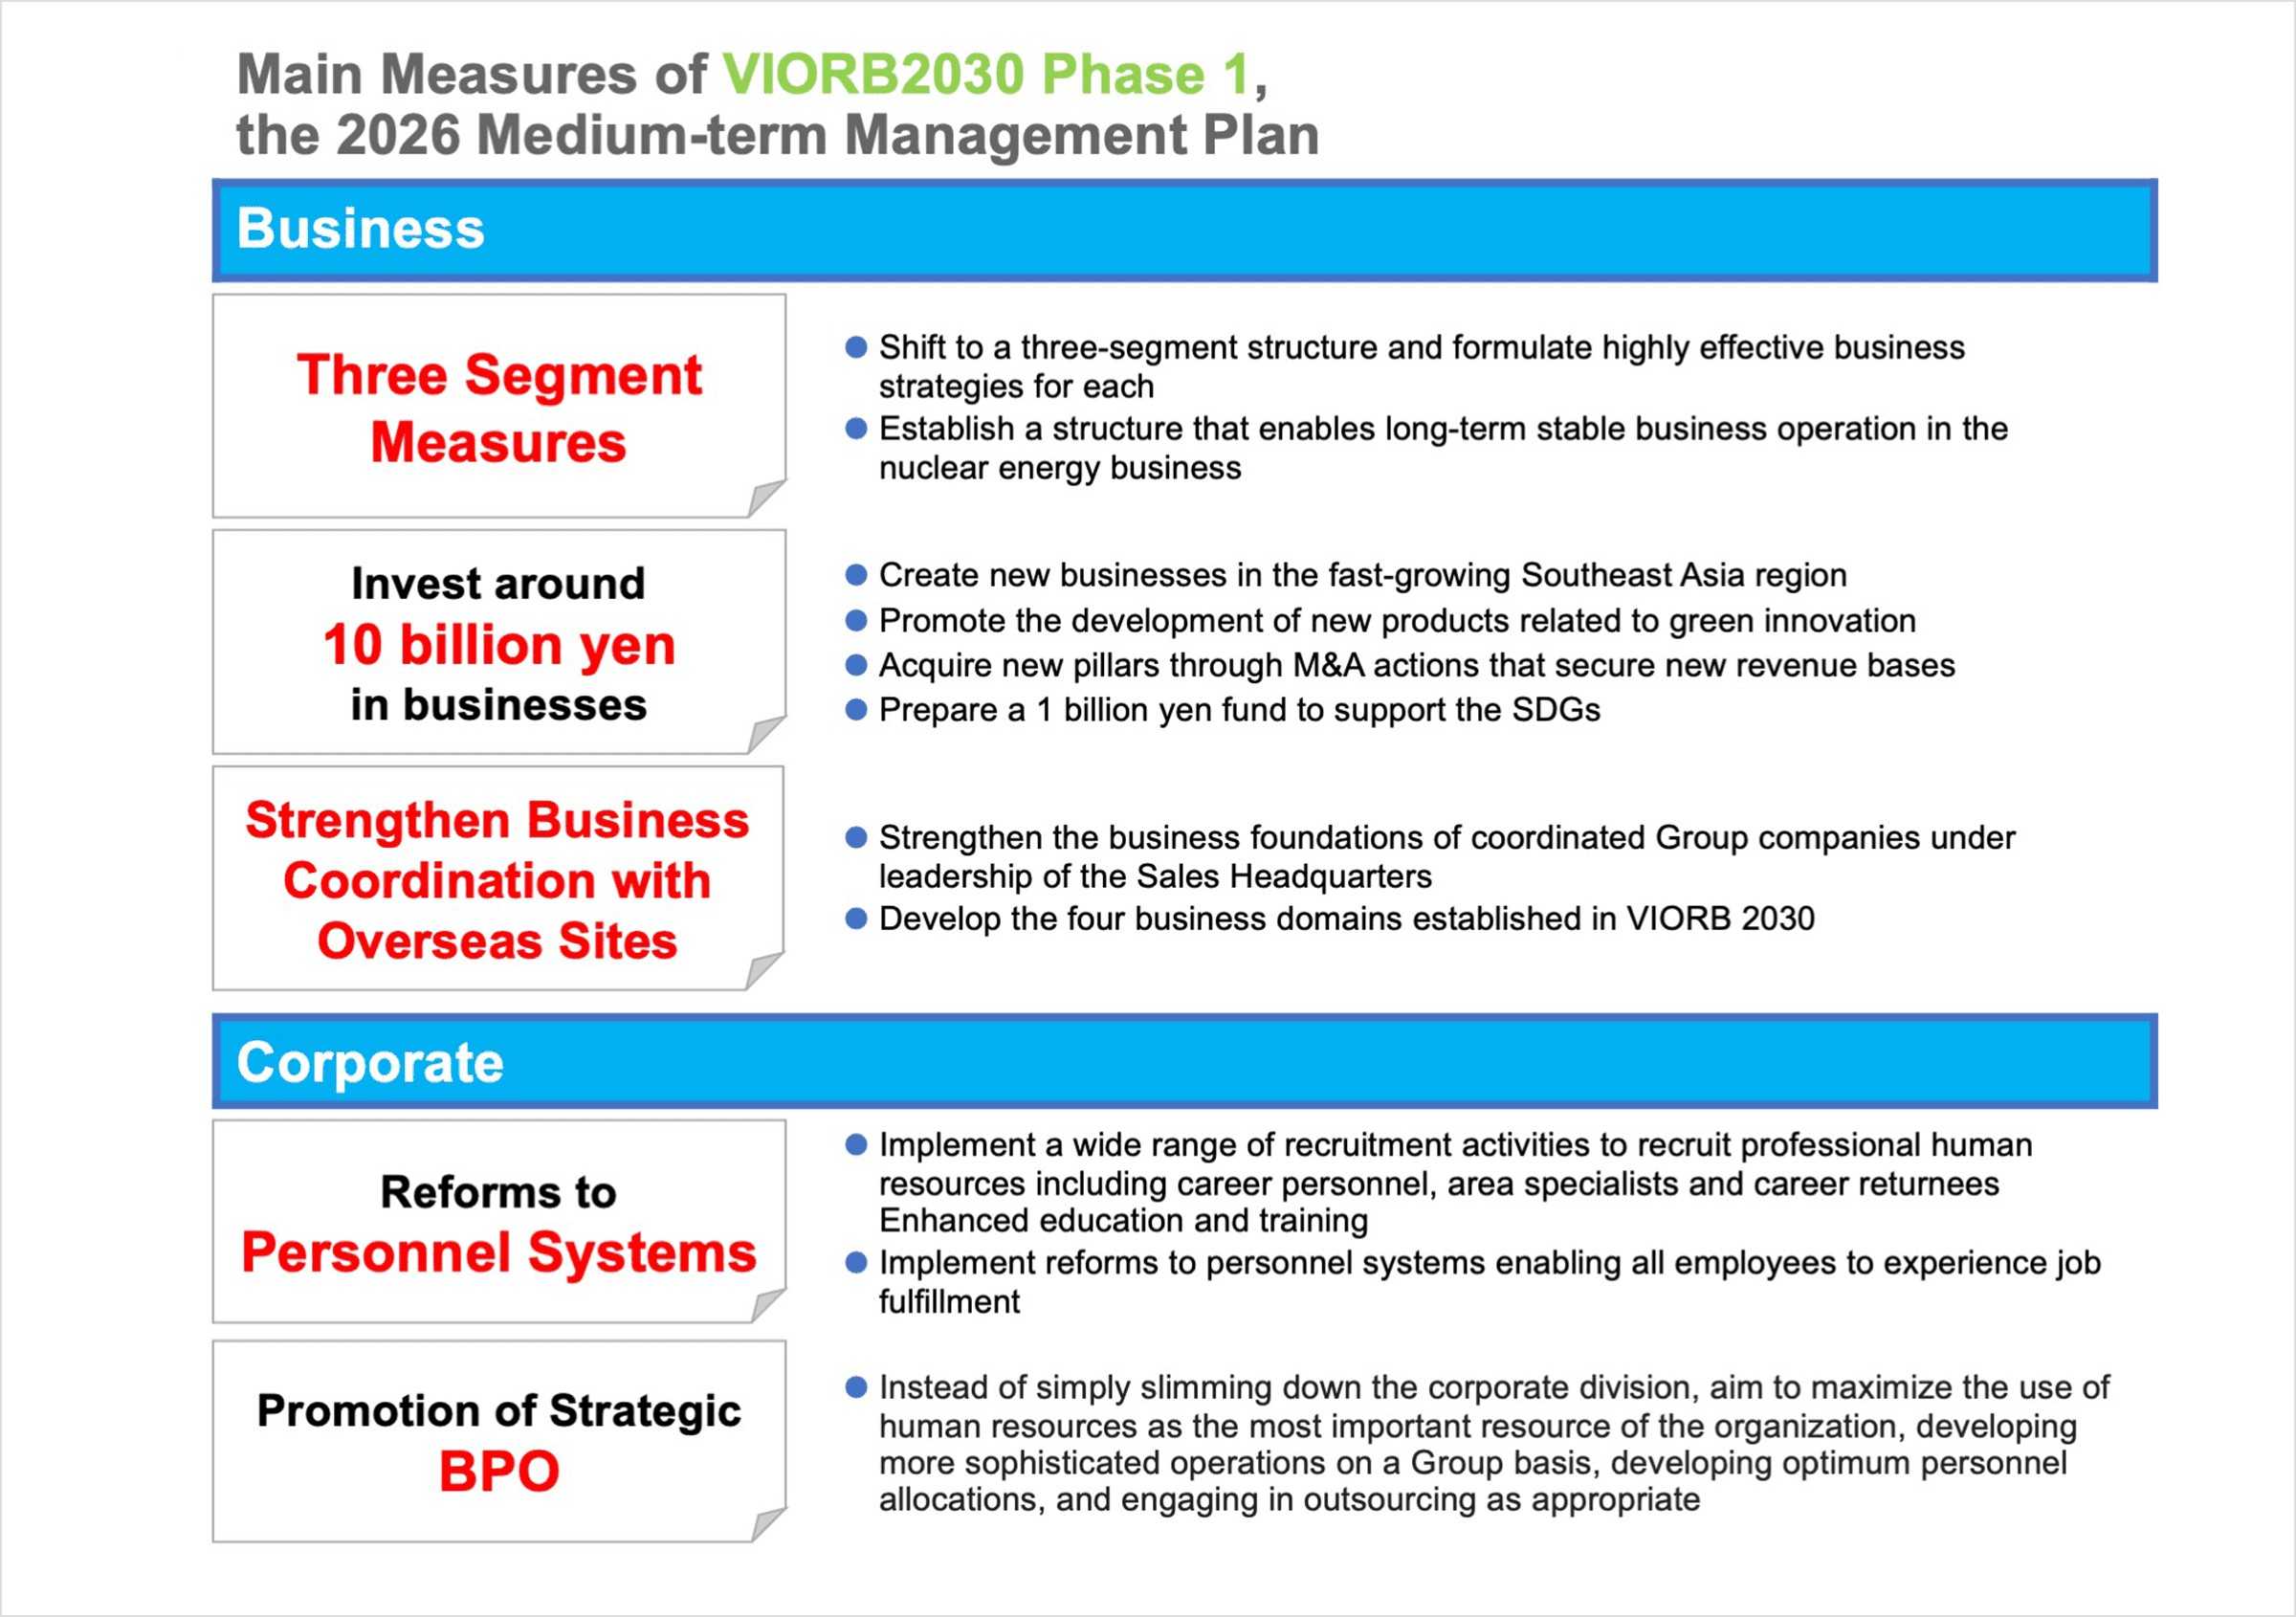 Main Measures of VIORB2030 Phase1 the 2026 Medium-term Management Plan